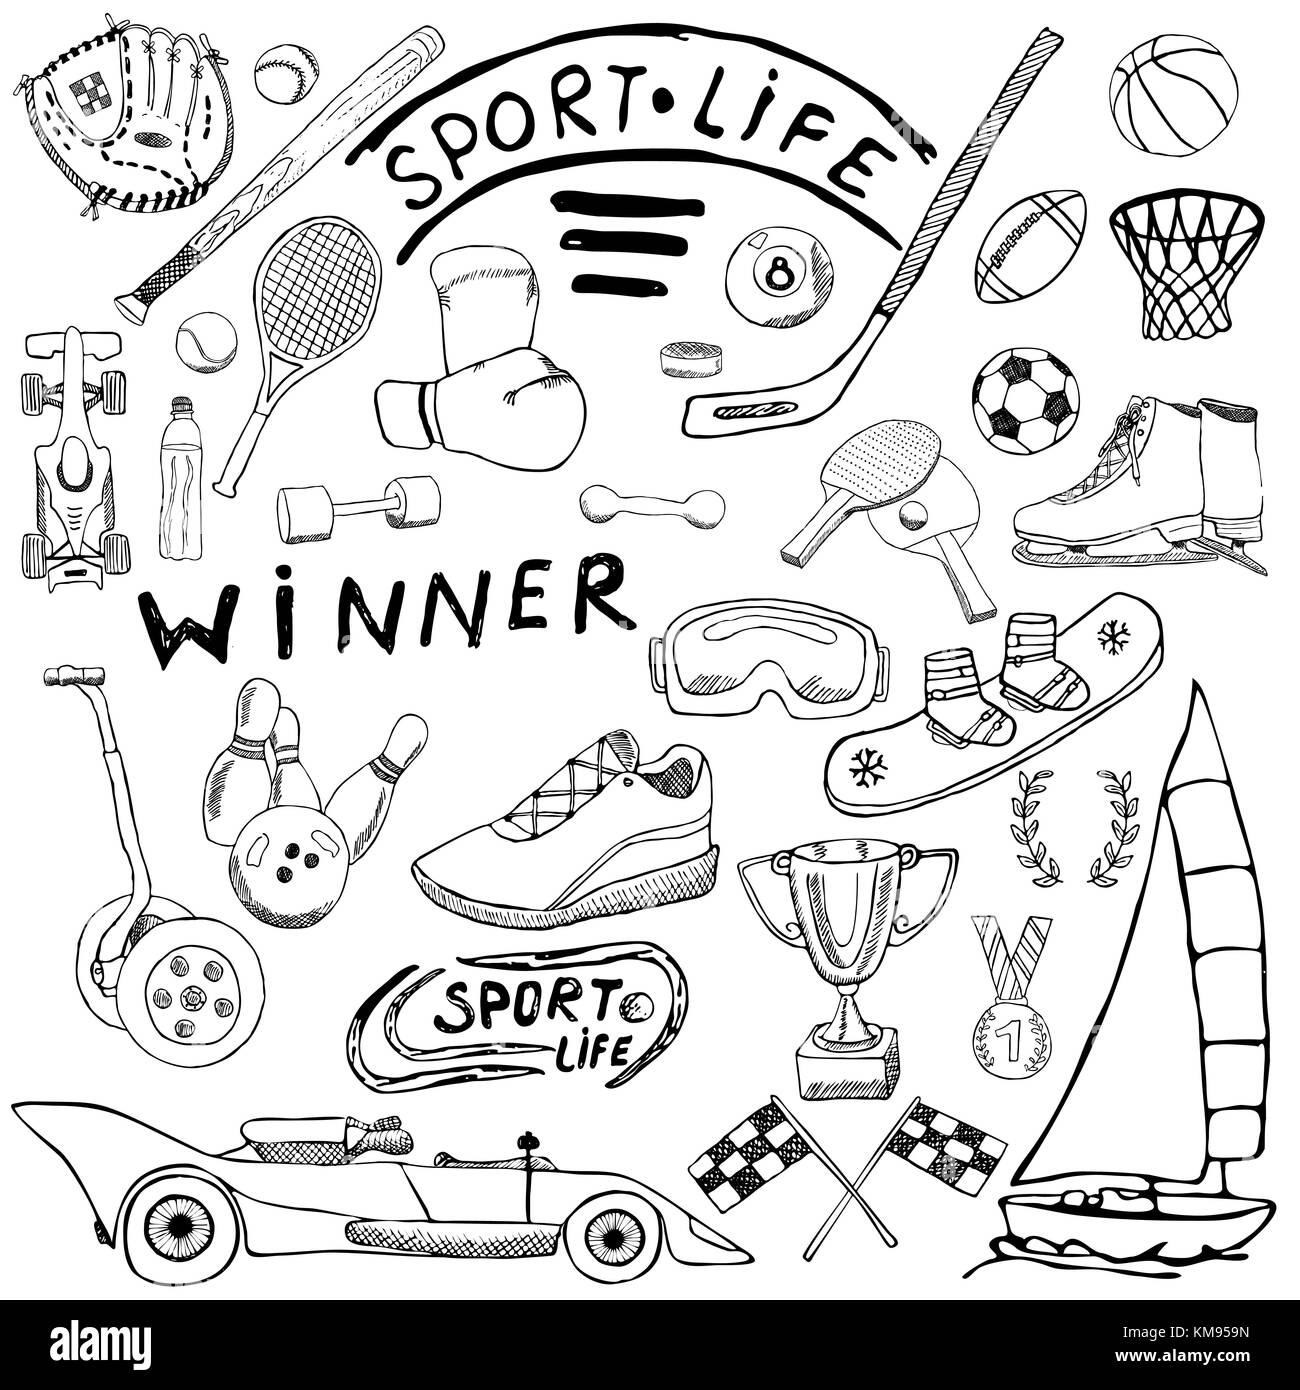 Sport life sketch doodles elements. Hand drawn set with baseball ...